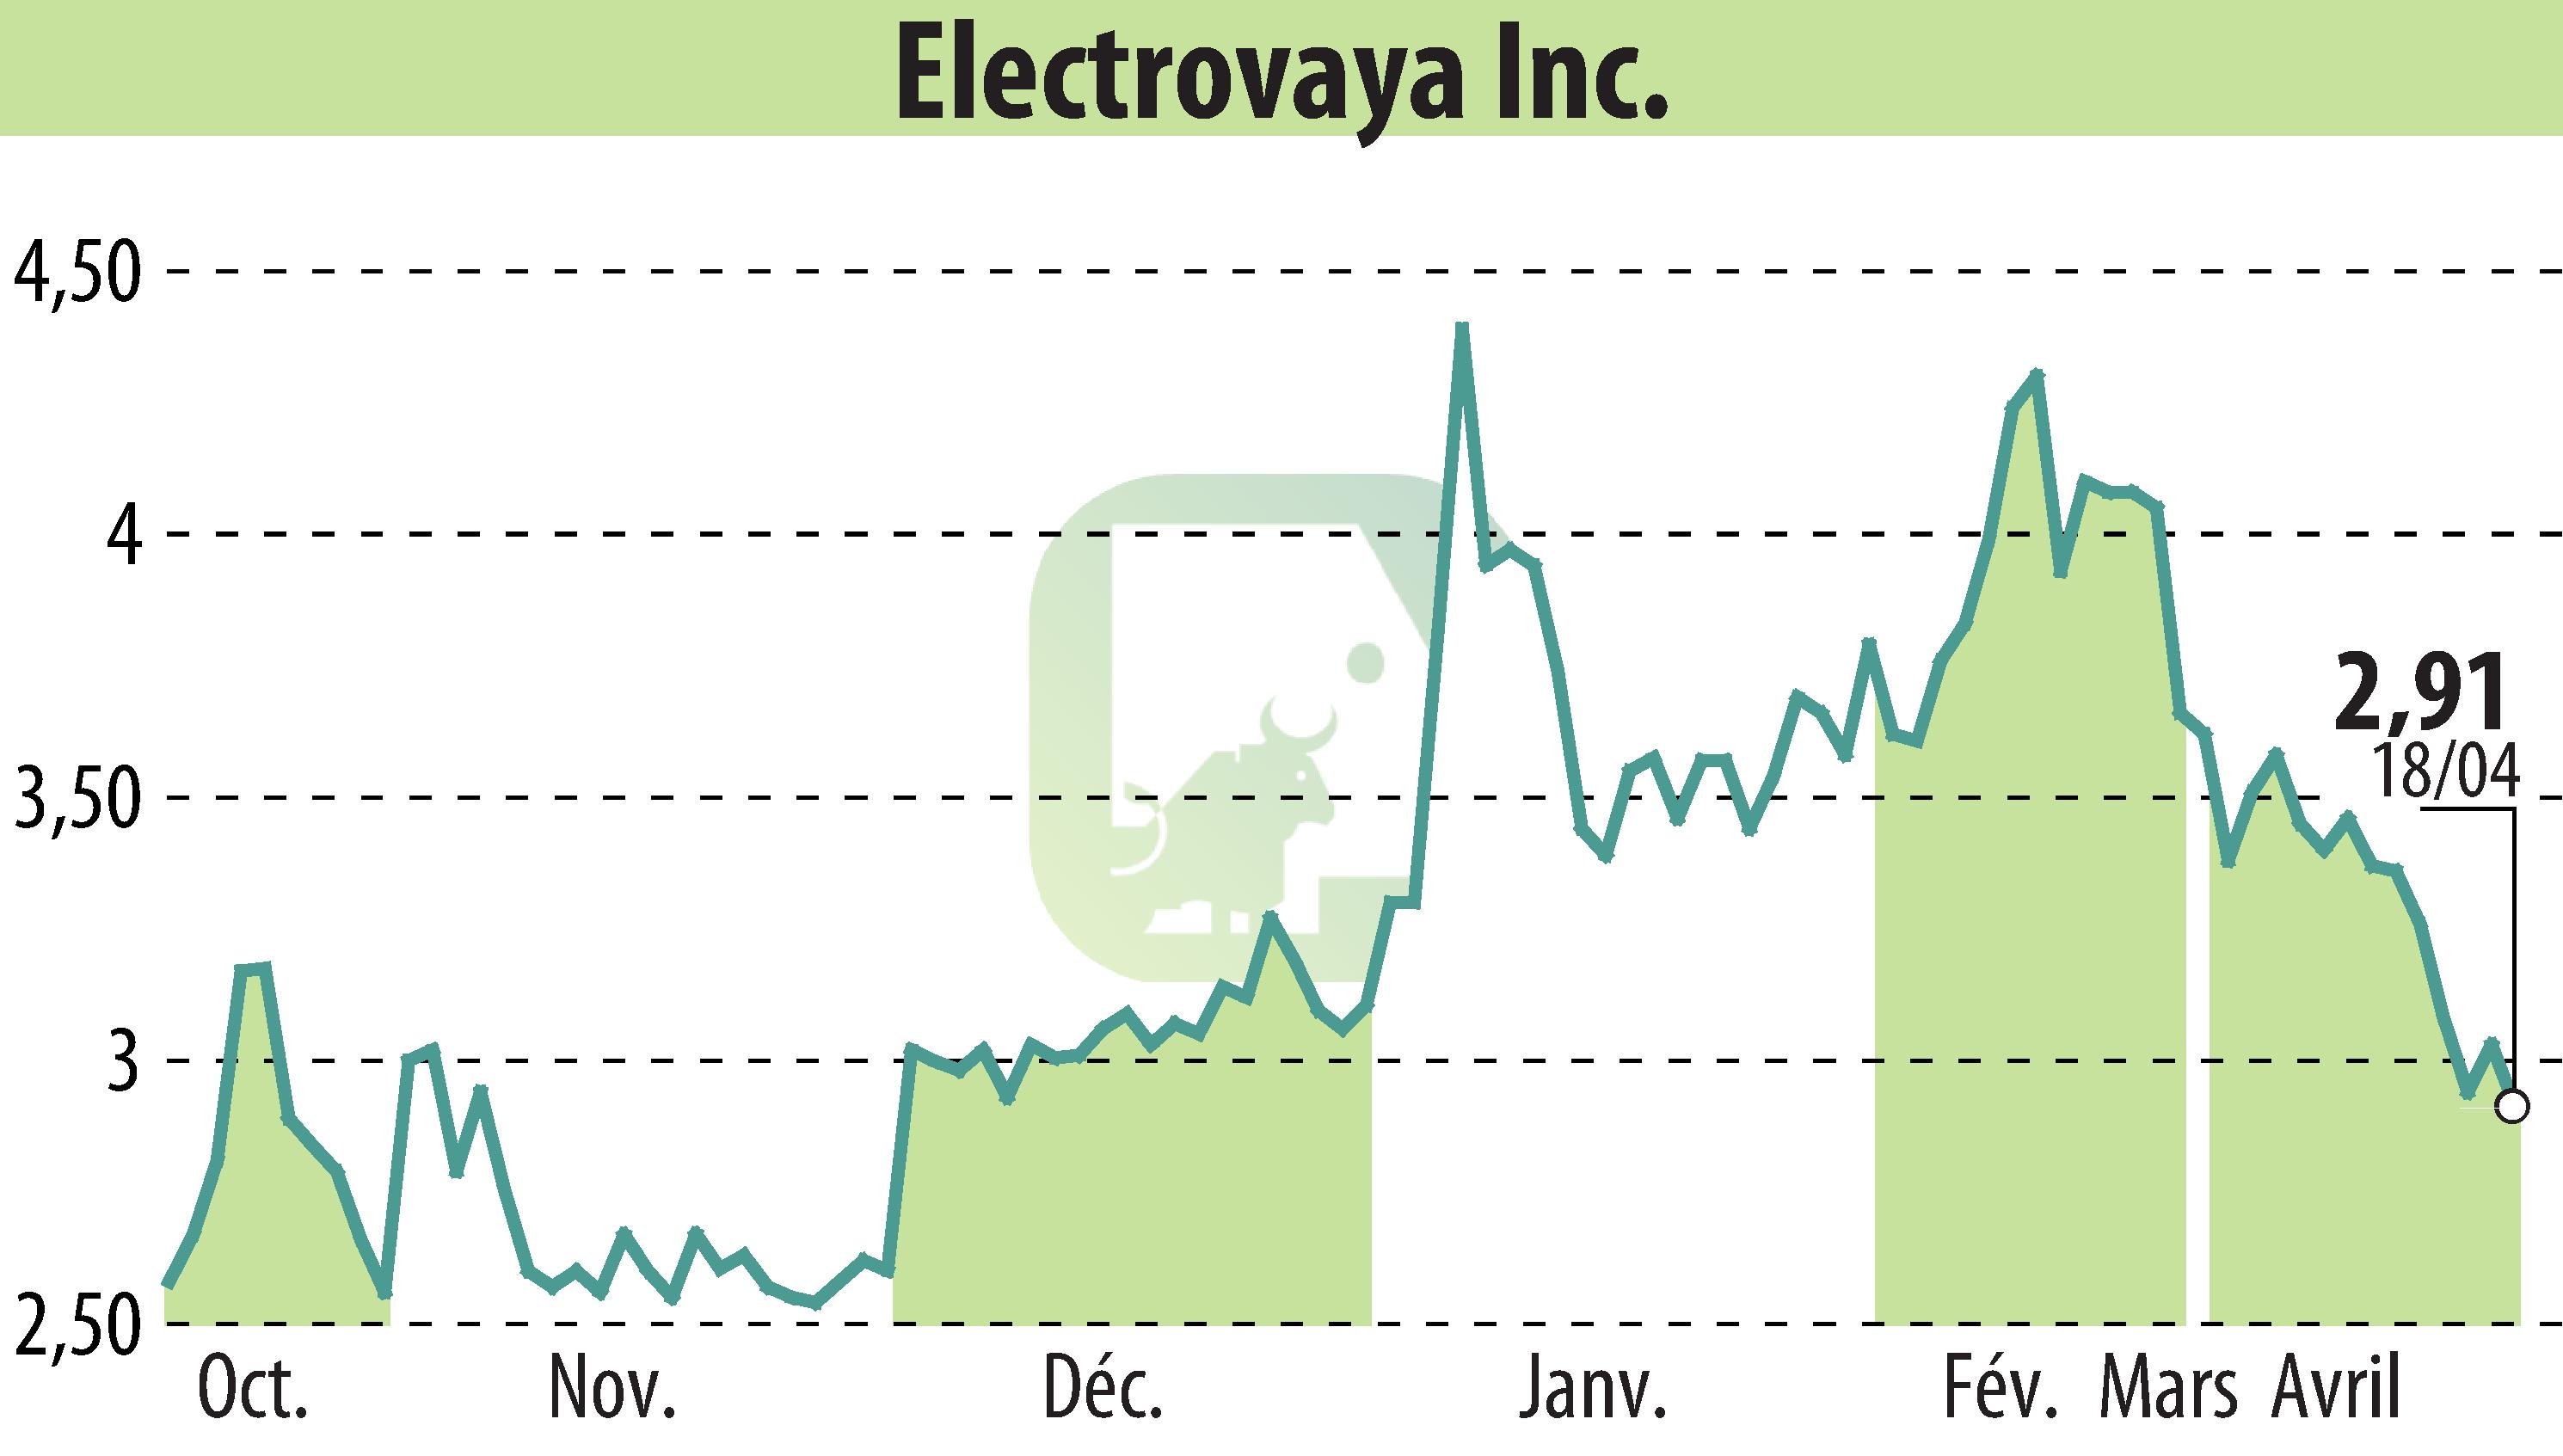 Stock price chart of Electrovaya, Inc. (EBR:ELVA) showing fluctuations.